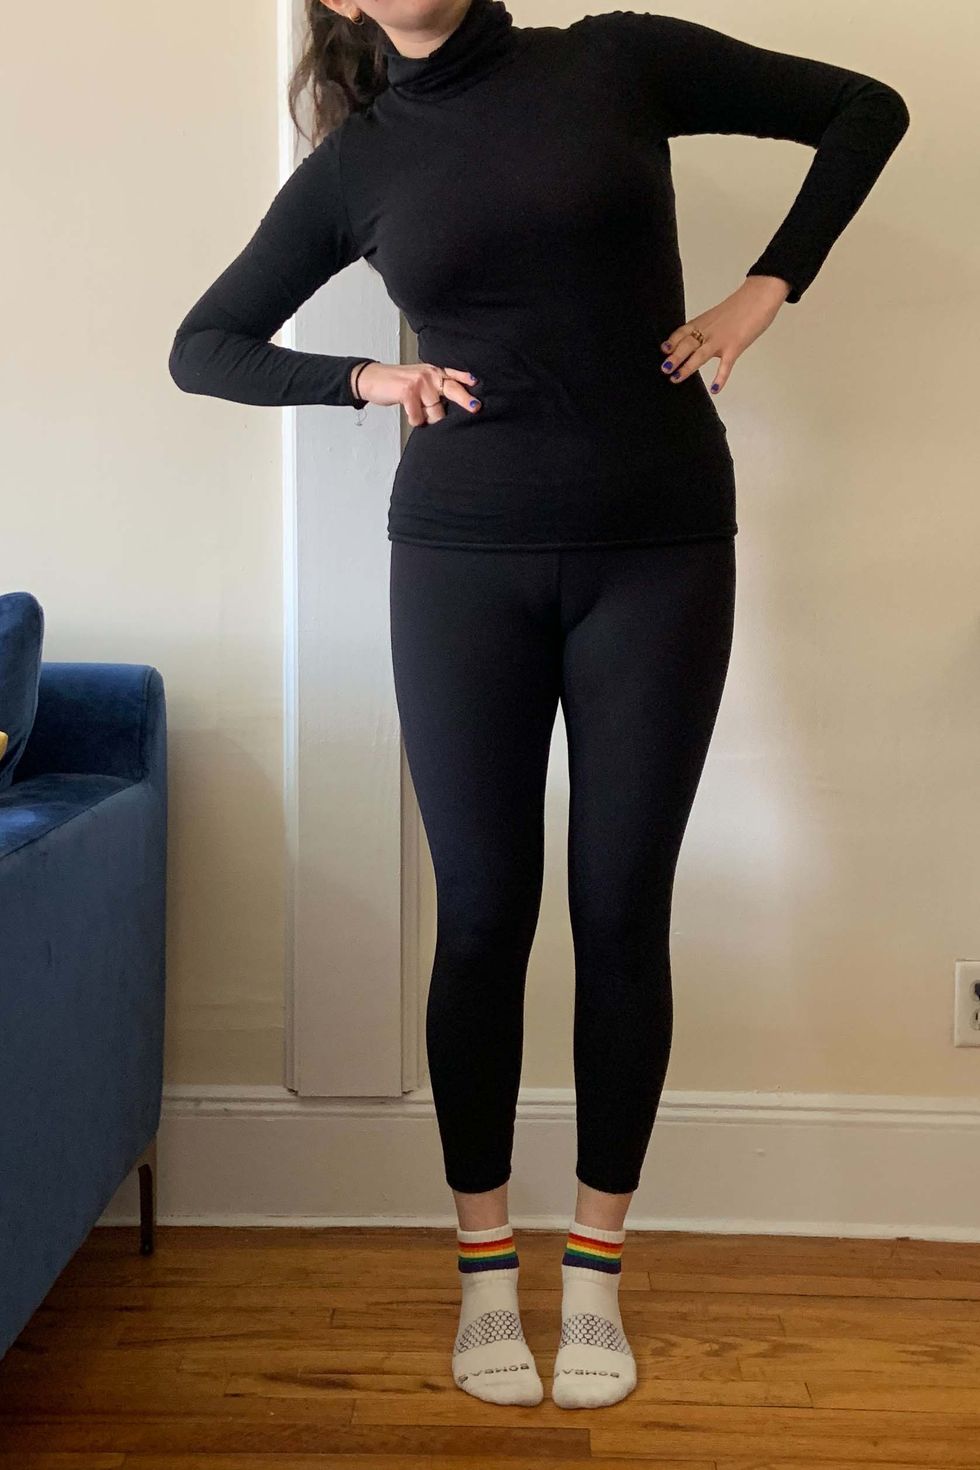 a woman wearing black leggings and a black turtle neck bending to the side to demonstrate how to measure your waist